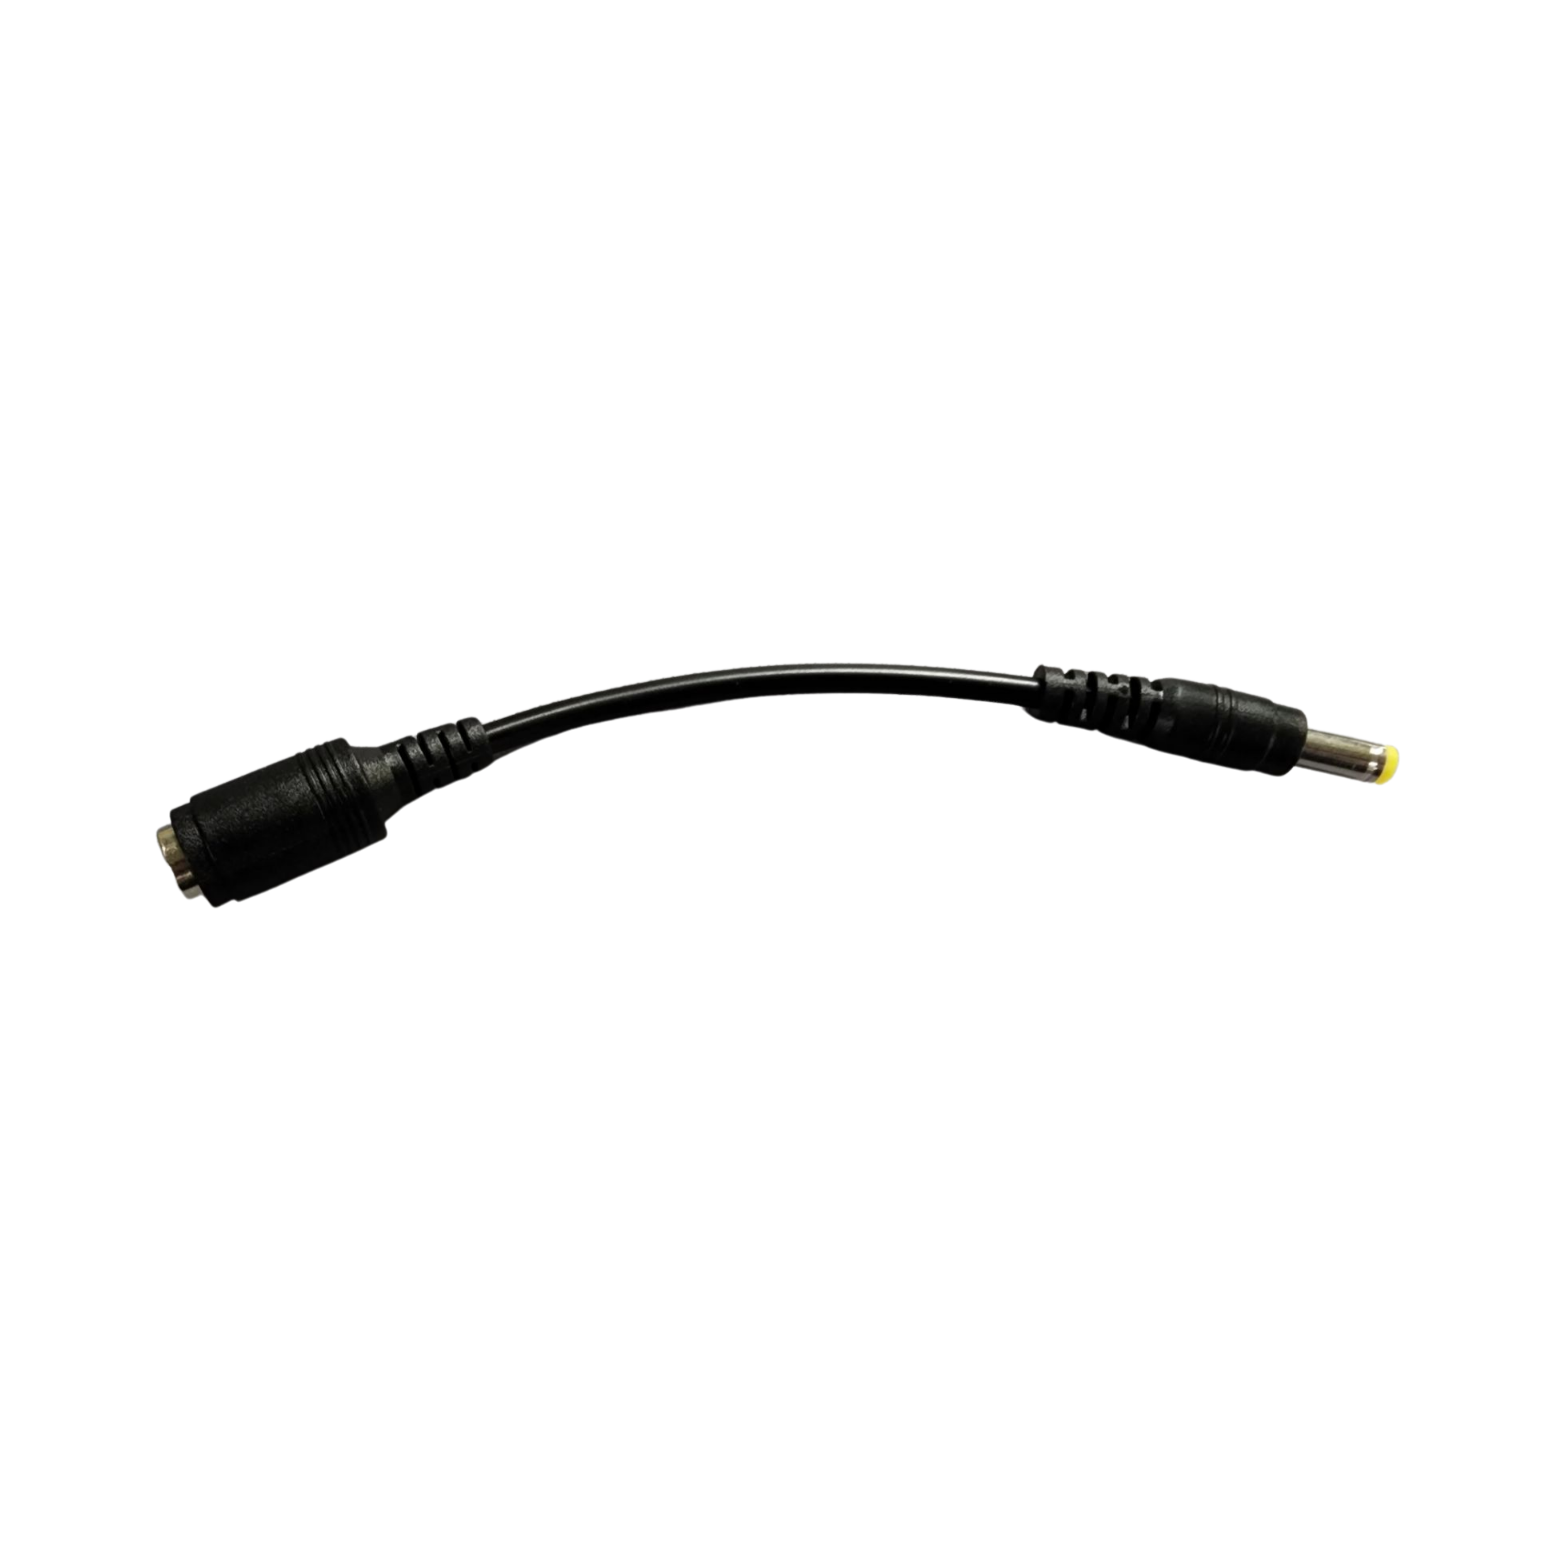 Laptop PSU DC7450 7.4*5mm Female to DC Male 5525 (5.5*2.5mm) Charging Adapter Cable For ISDT Charger